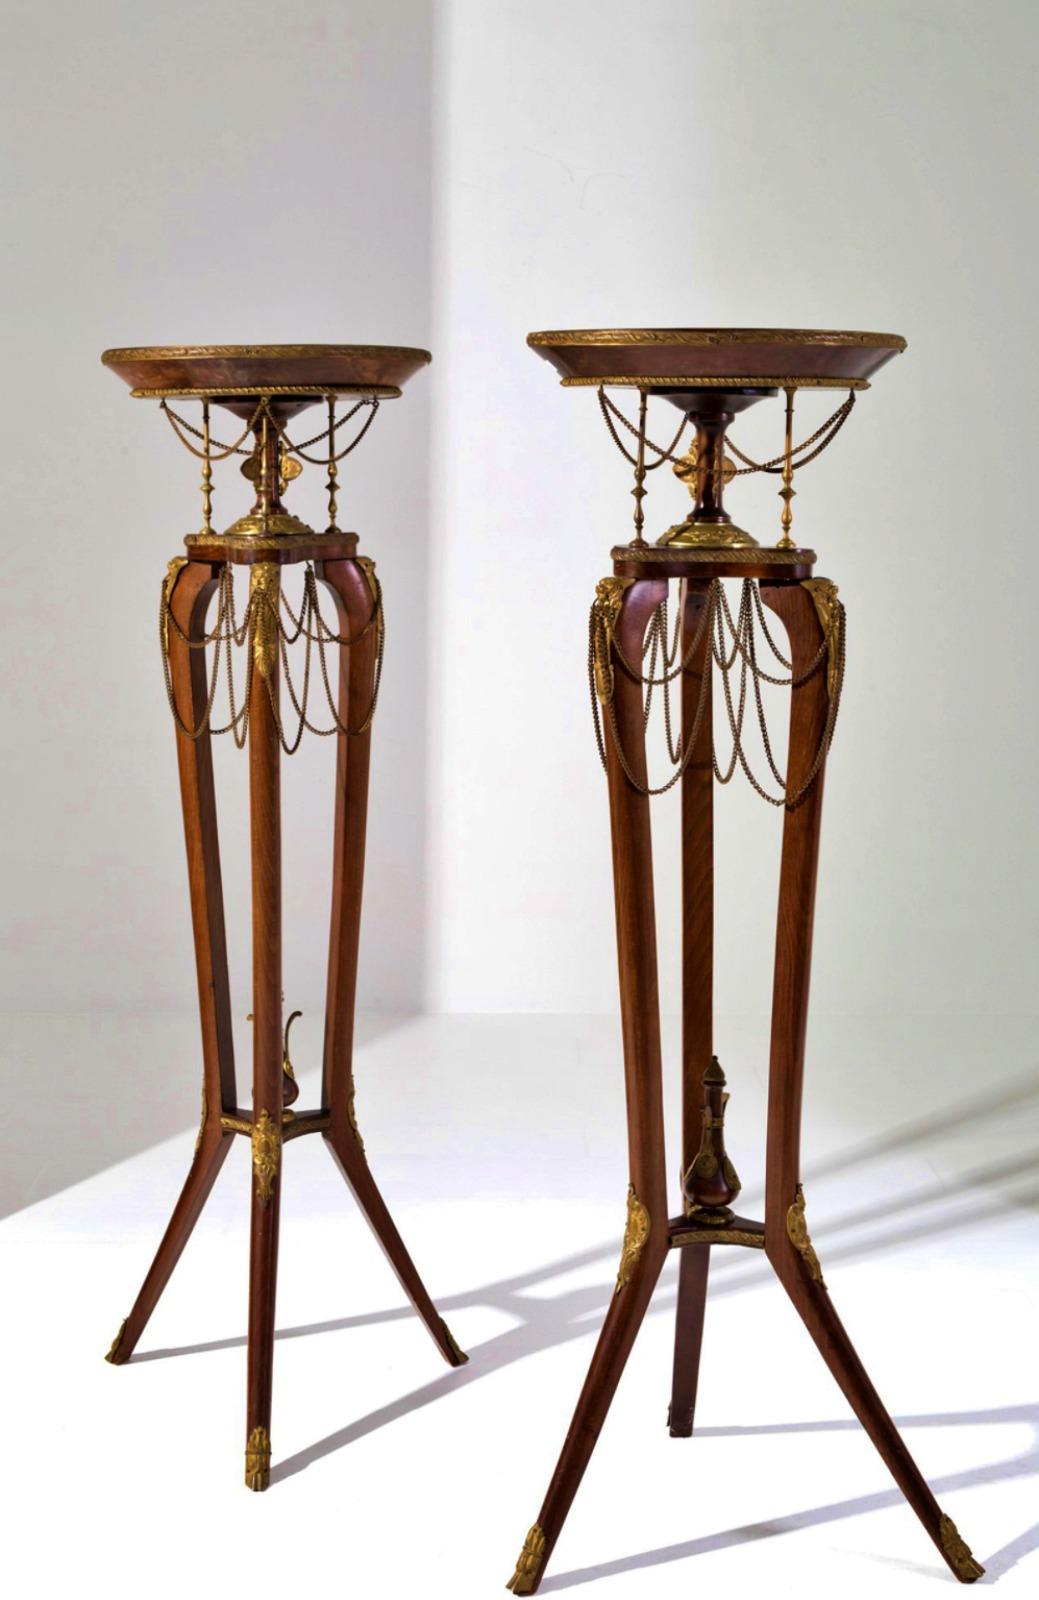 Pair of Gueridon Tripods in mahogany wood Napoleon III 19th century
with marble top and finely chiseled and gilded bronze finishes. Napoleon III period. 
France
Dimensioni

Altezza 121 cm ca.